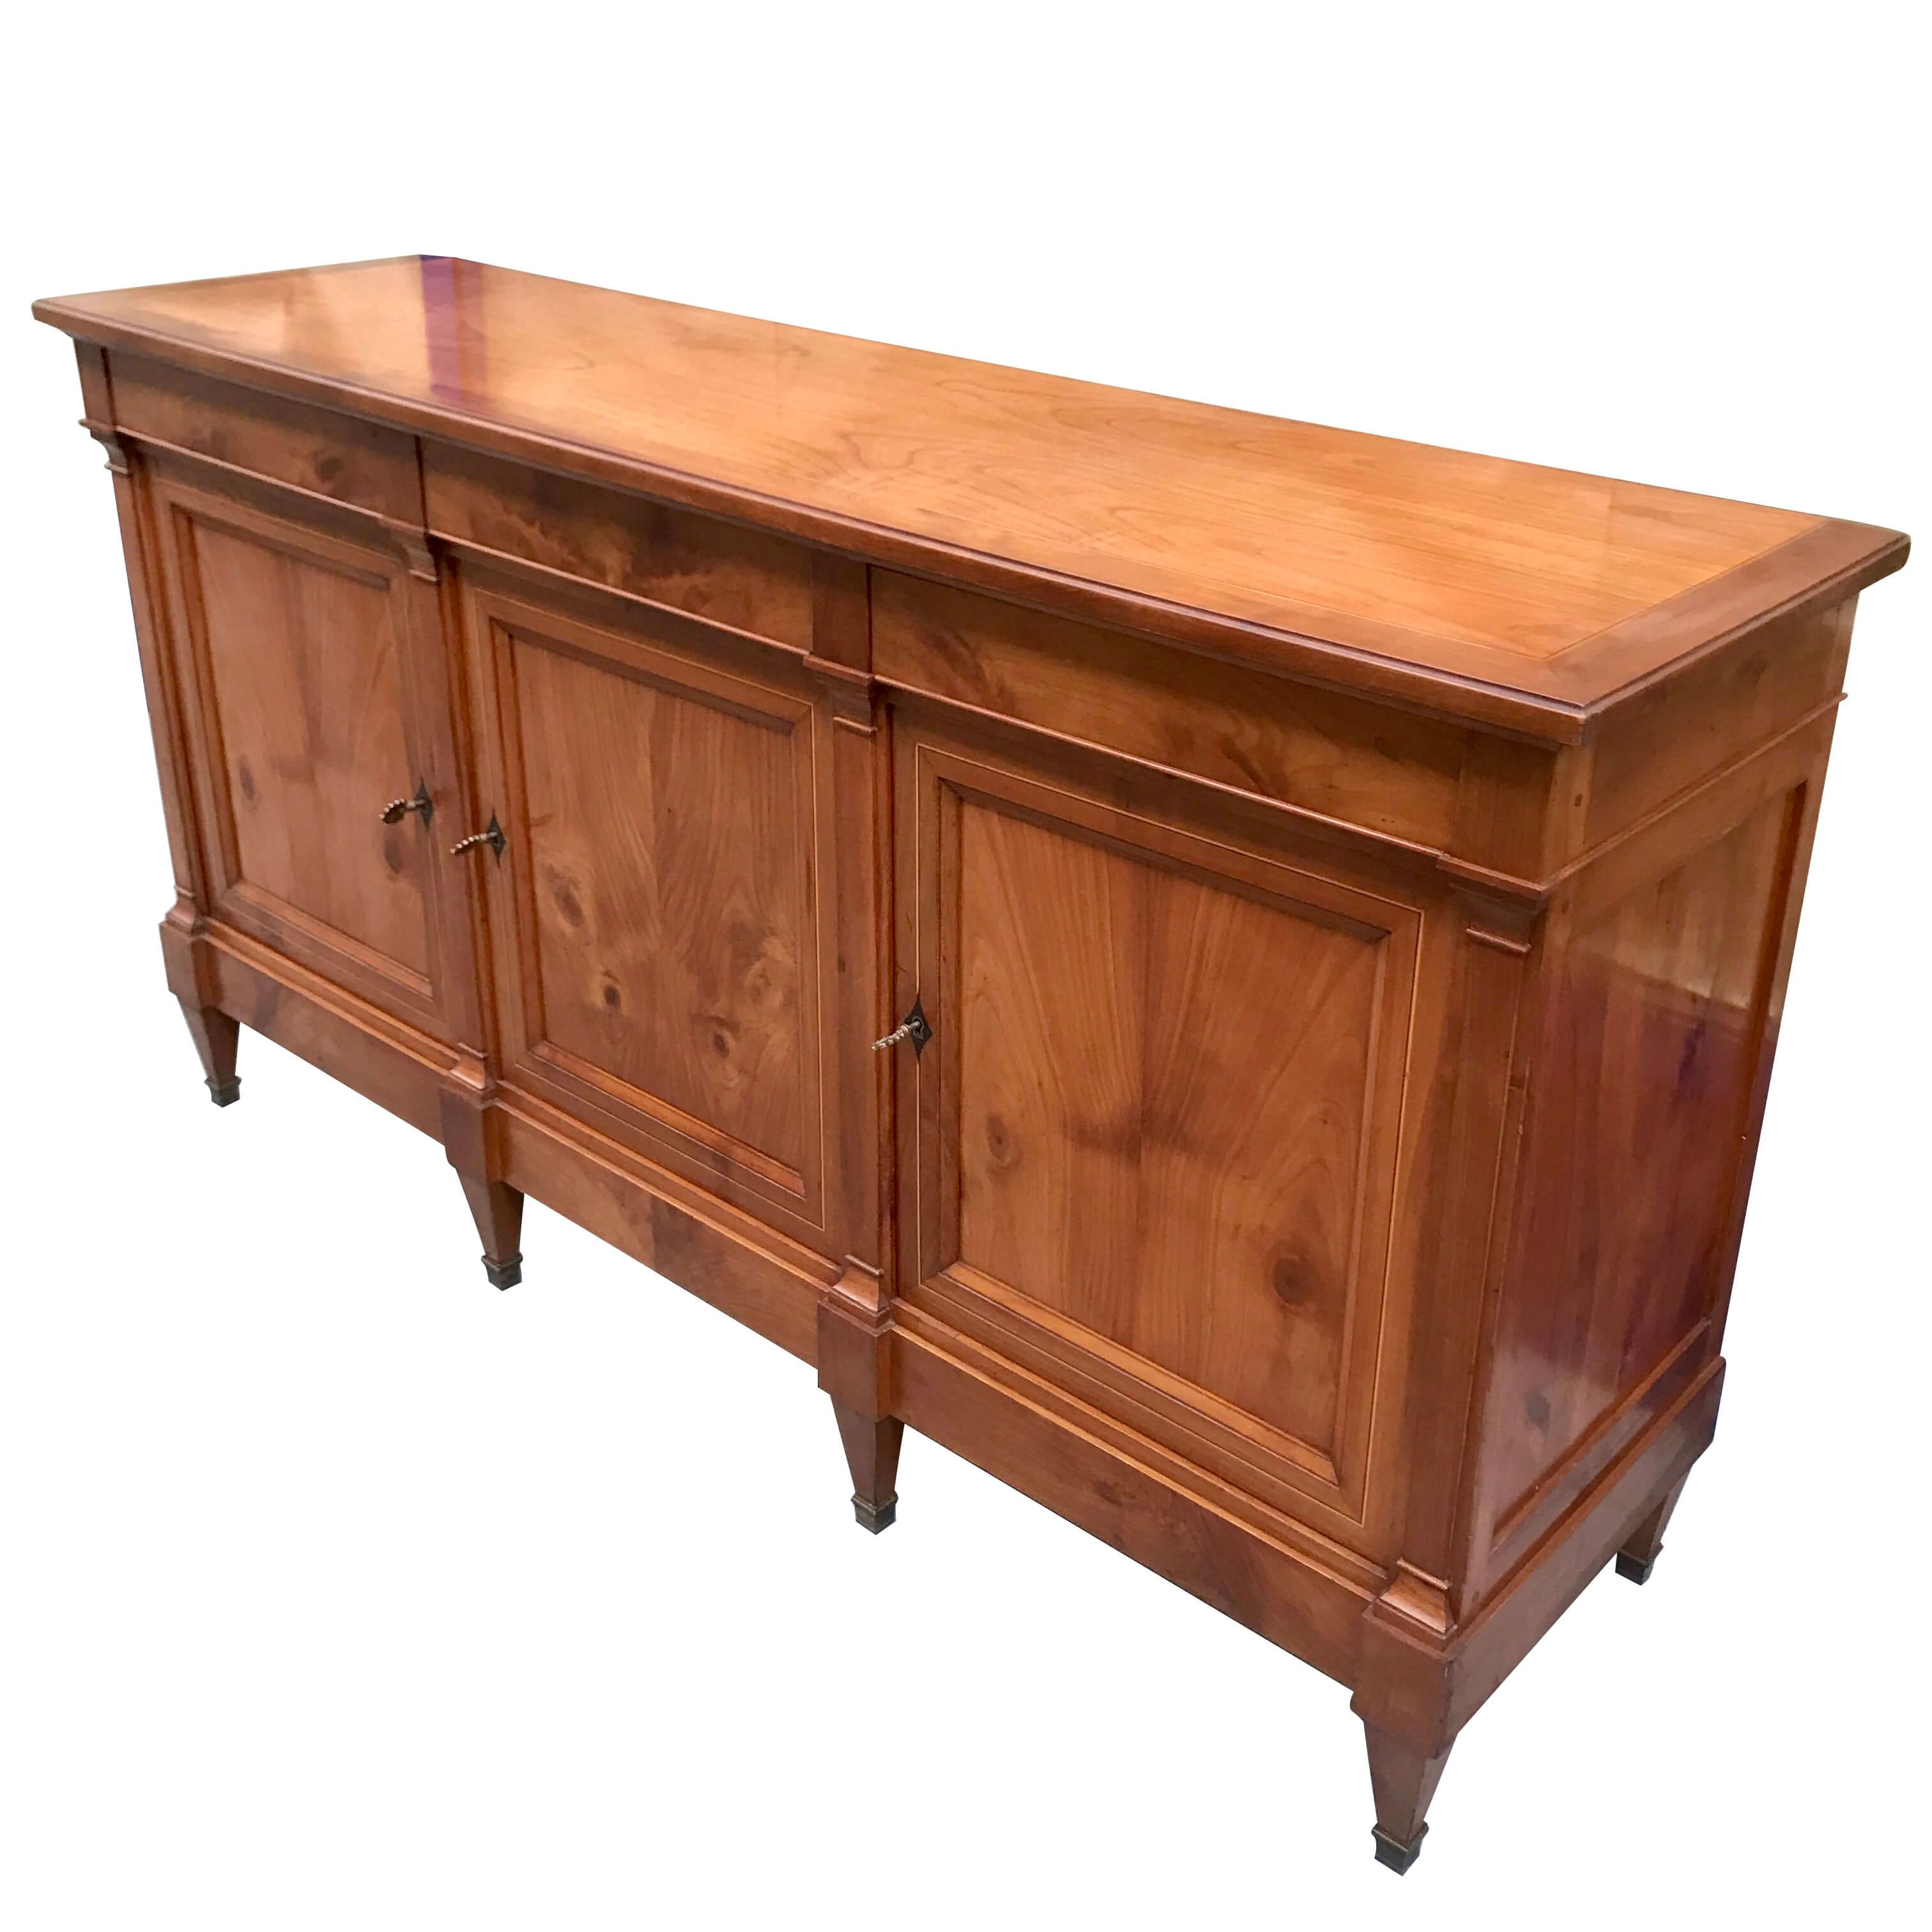 Directoire Style Sideboard With 3 Doors And 3 Drawers In Cherry Wood With  Inlaid Fillets And Bronze Brackets, 19th Century | Intondo With Regard To Sideboard Storage Cabinet With 3 Drawers &amp; 3 Doors (View 12 of 15)